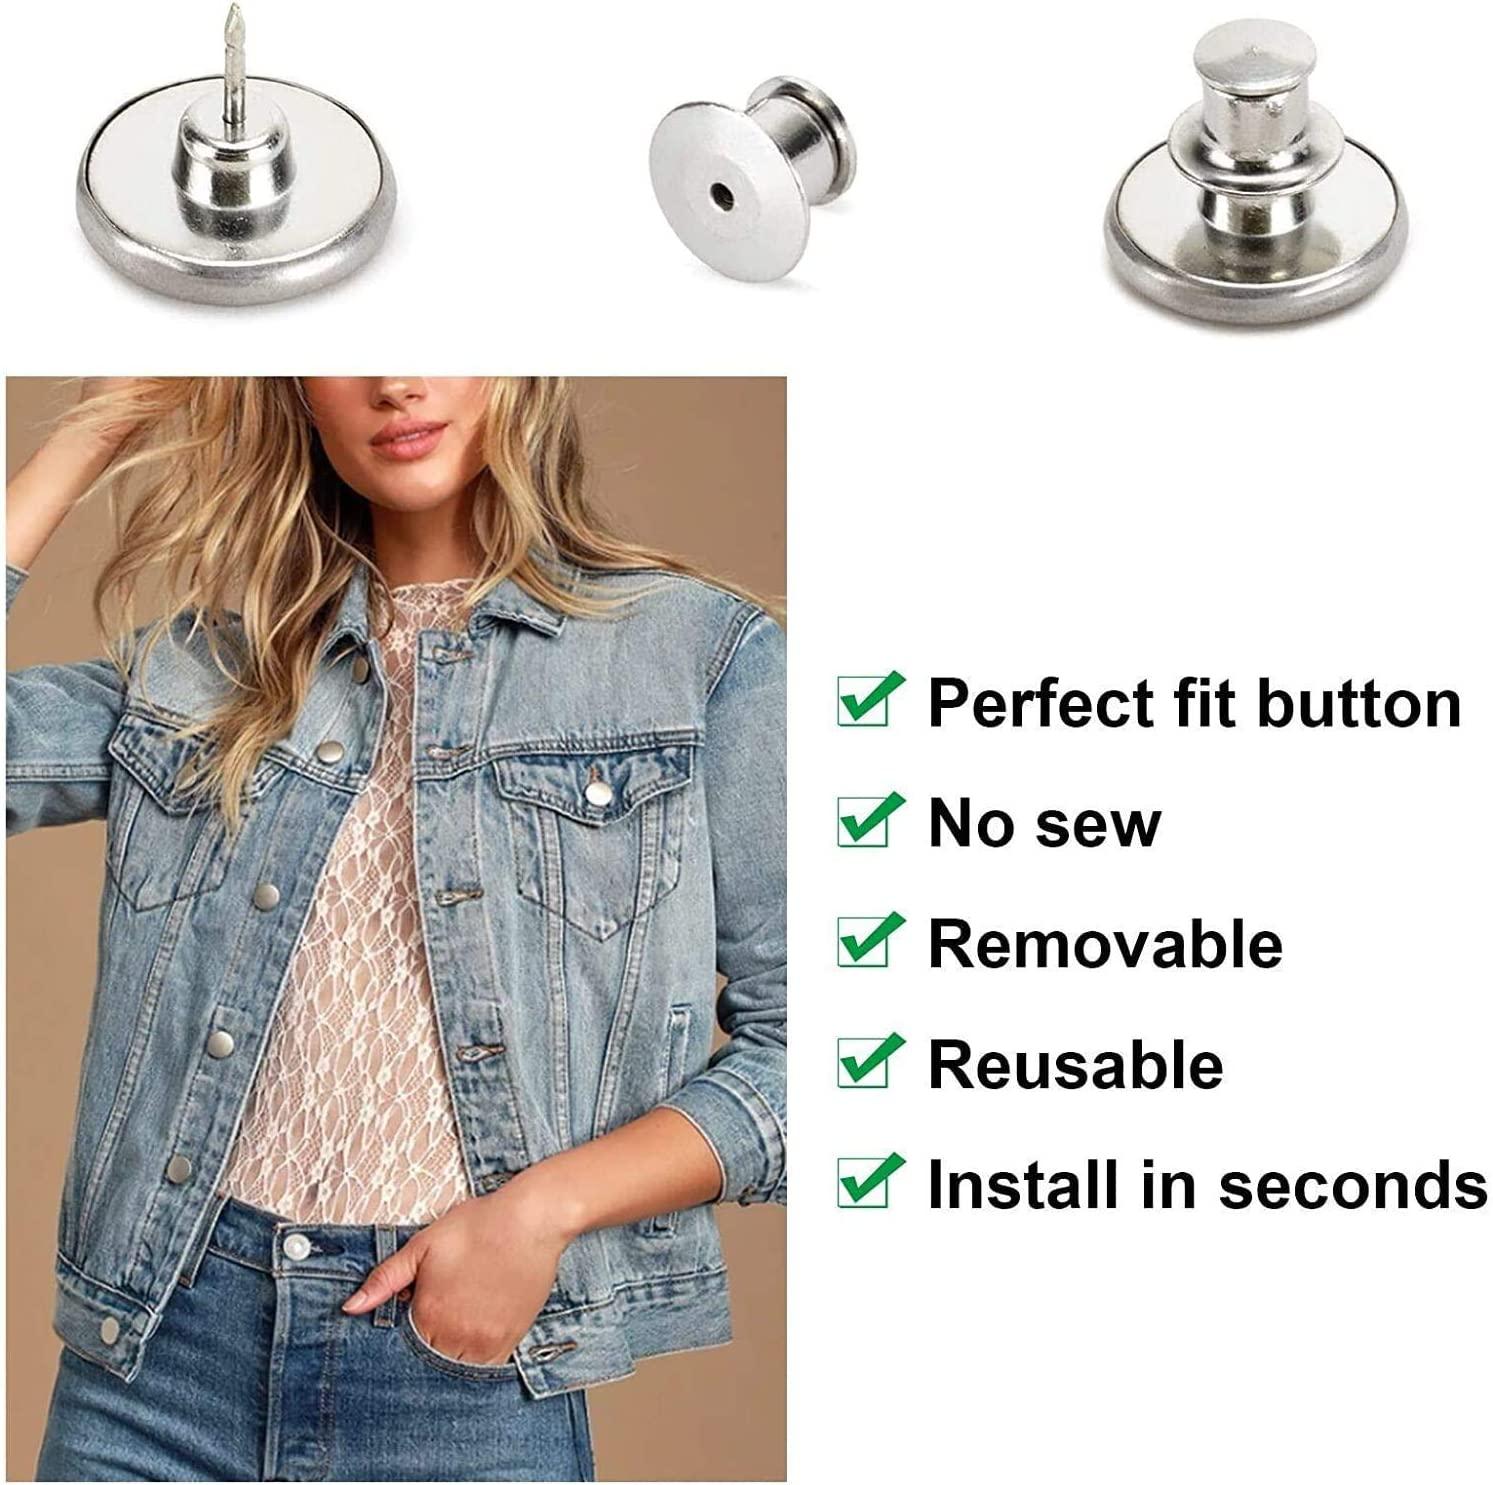 6PCS Perfect Fit Instant Button, Instant Buttons, Jean Replacement Buttons  Removable Button No Sew Buttons to Extend or Reduce an Inch to Any Pants  Waist in Seconds! 6PCS 6pcs-g